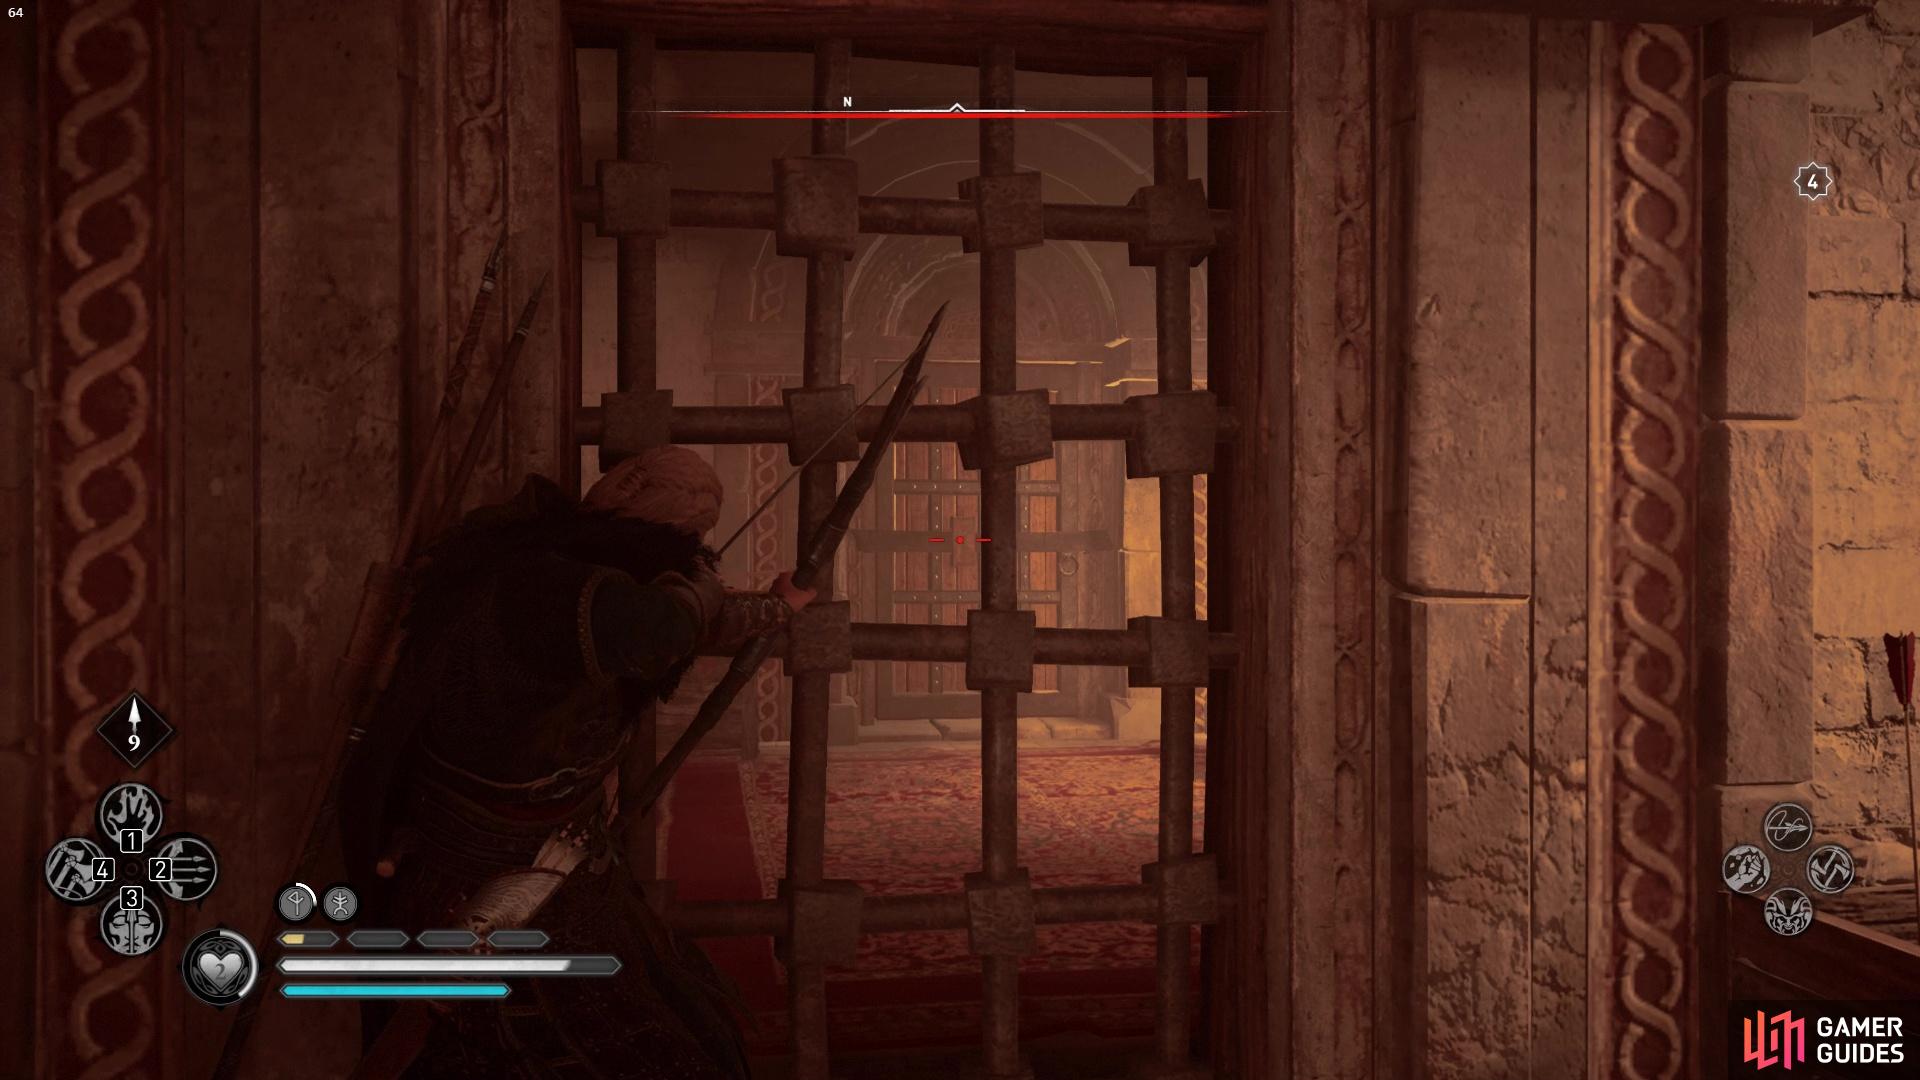 You'll first need to enter the main abbey and shoot the door lock through the bars.